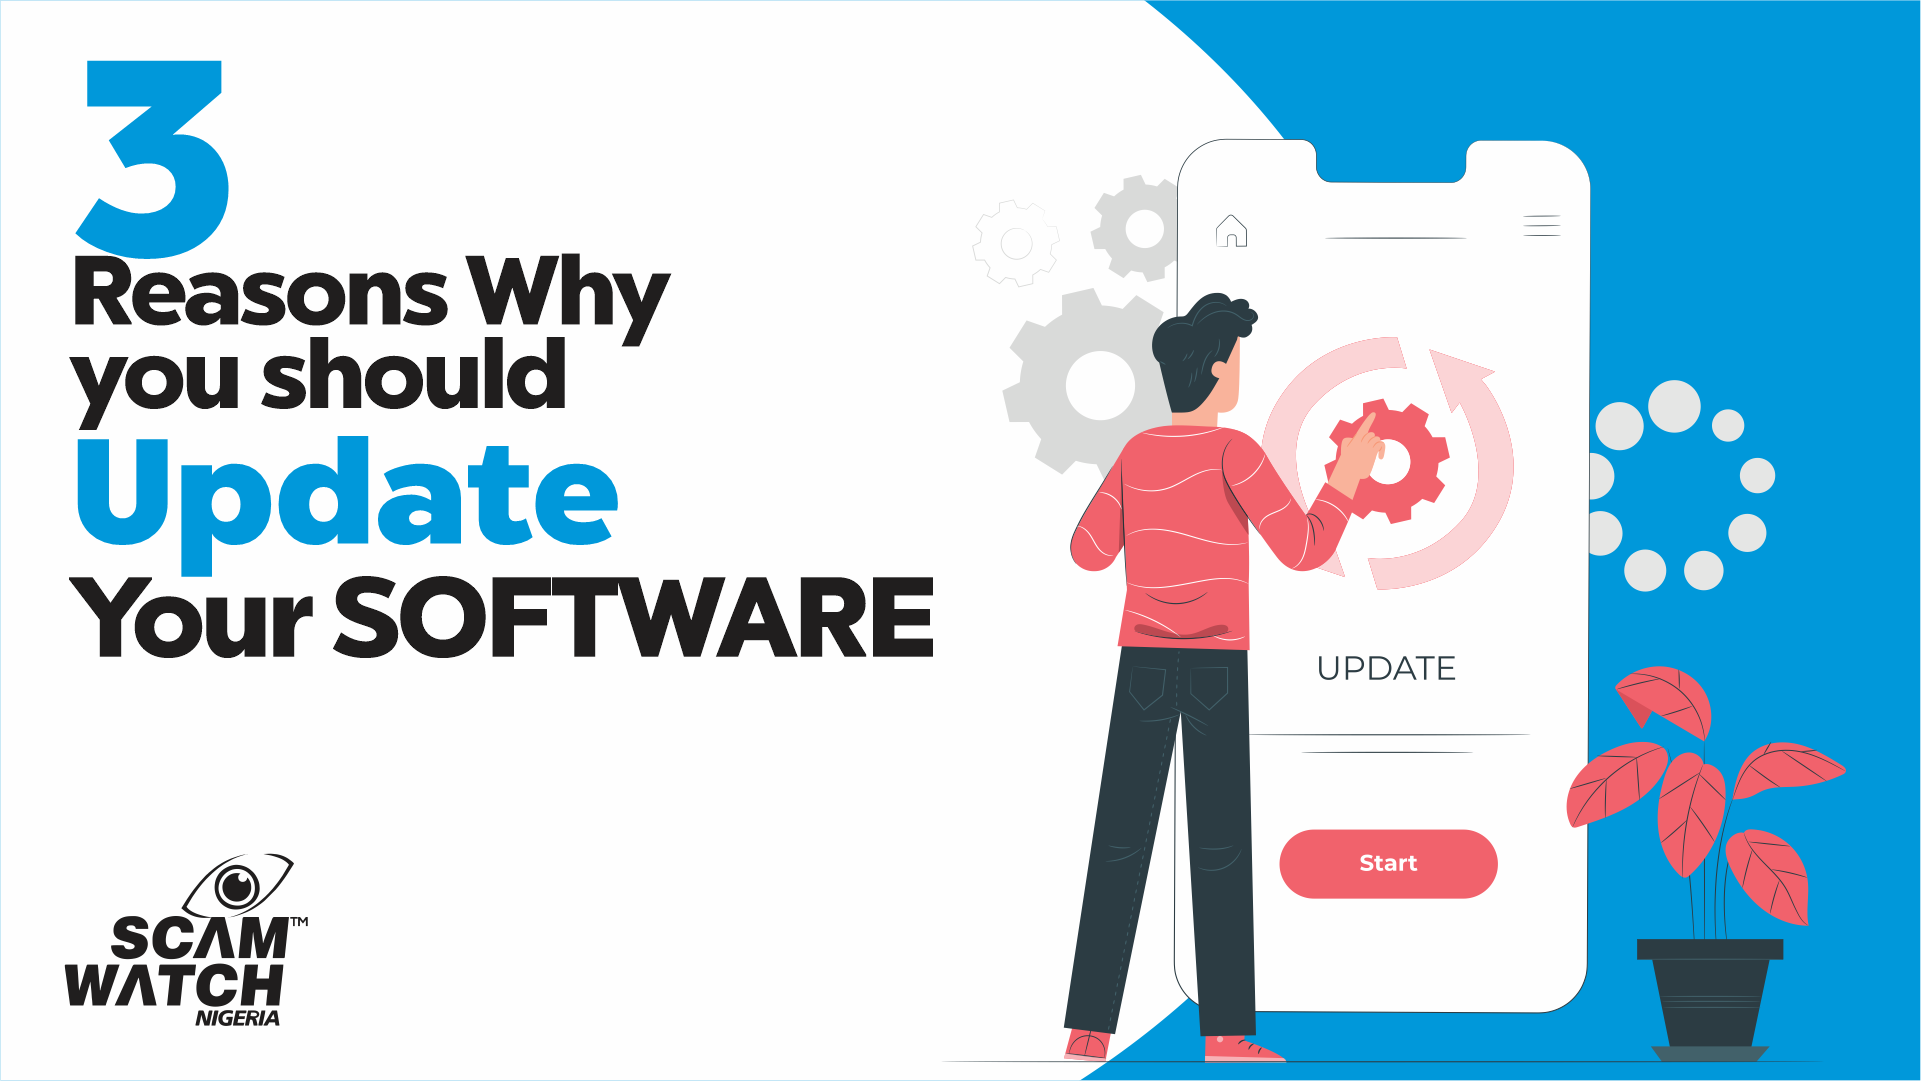 The importance of Software Updates